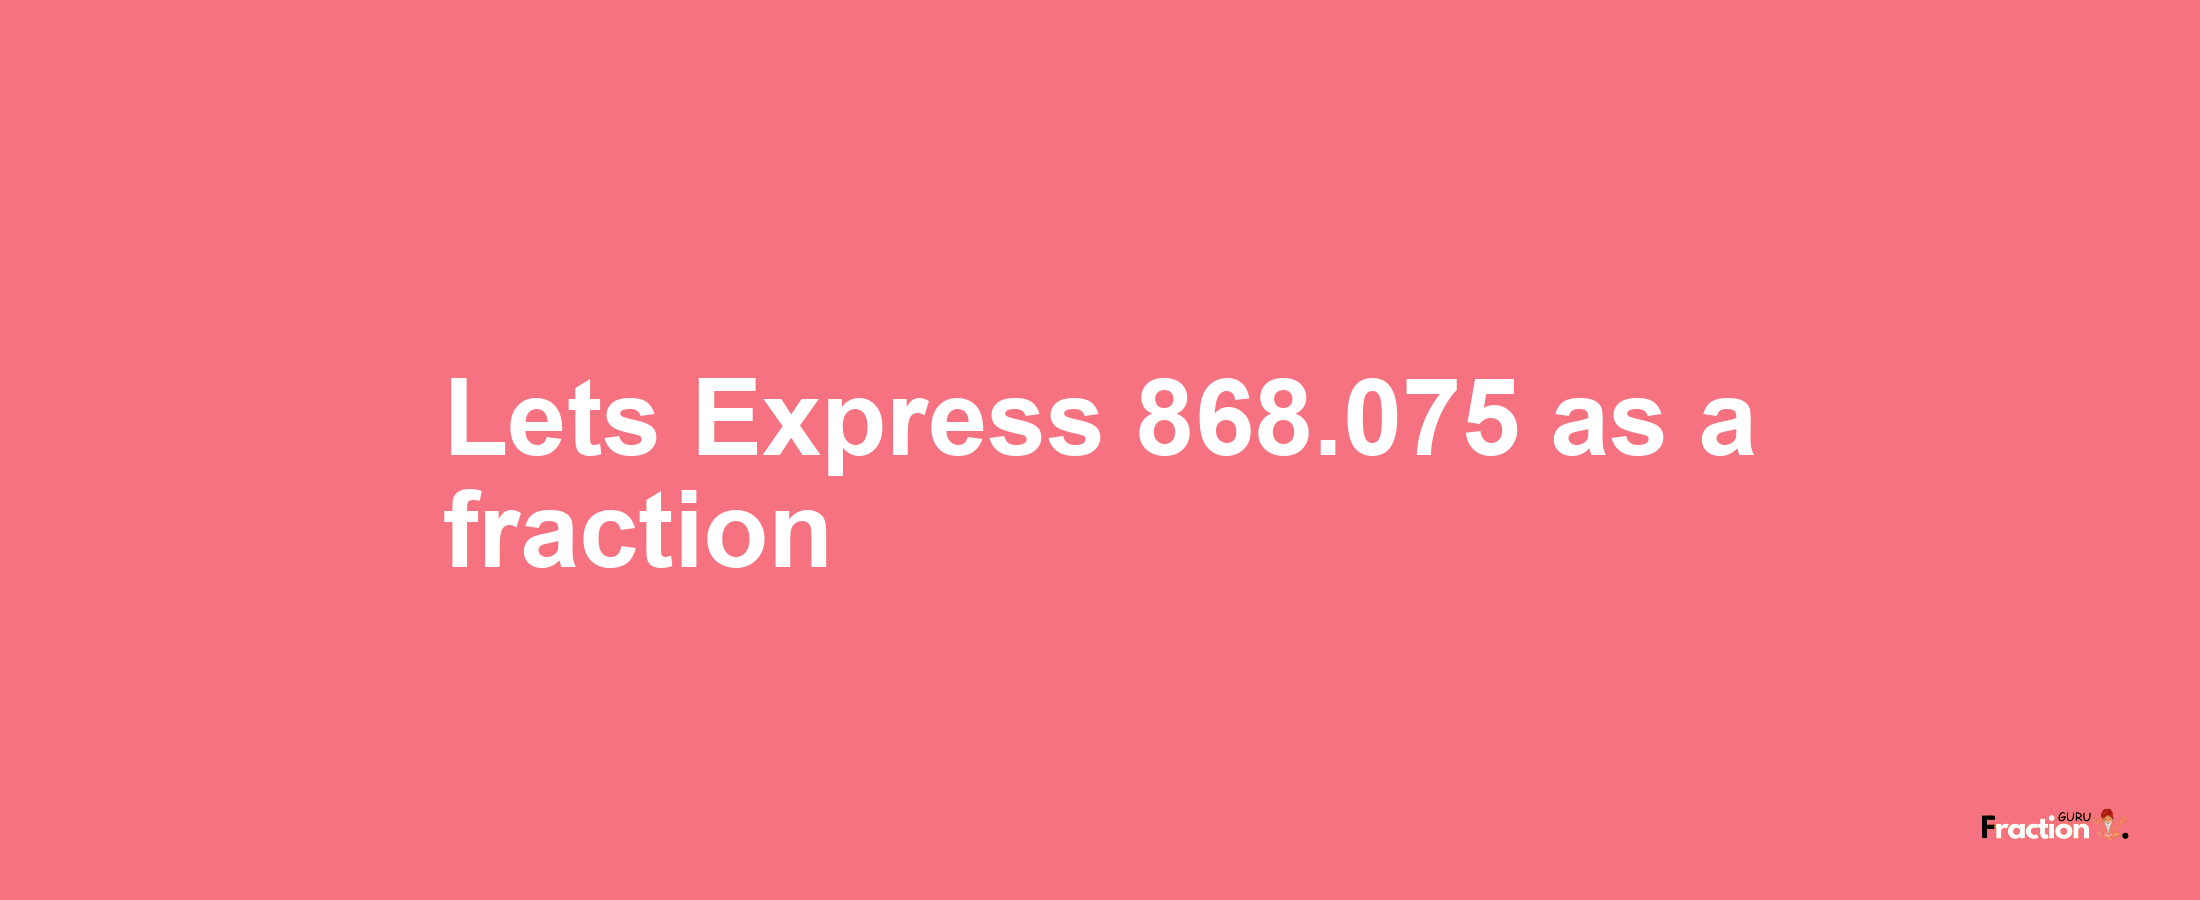 Lets Express 868.075 as afraction